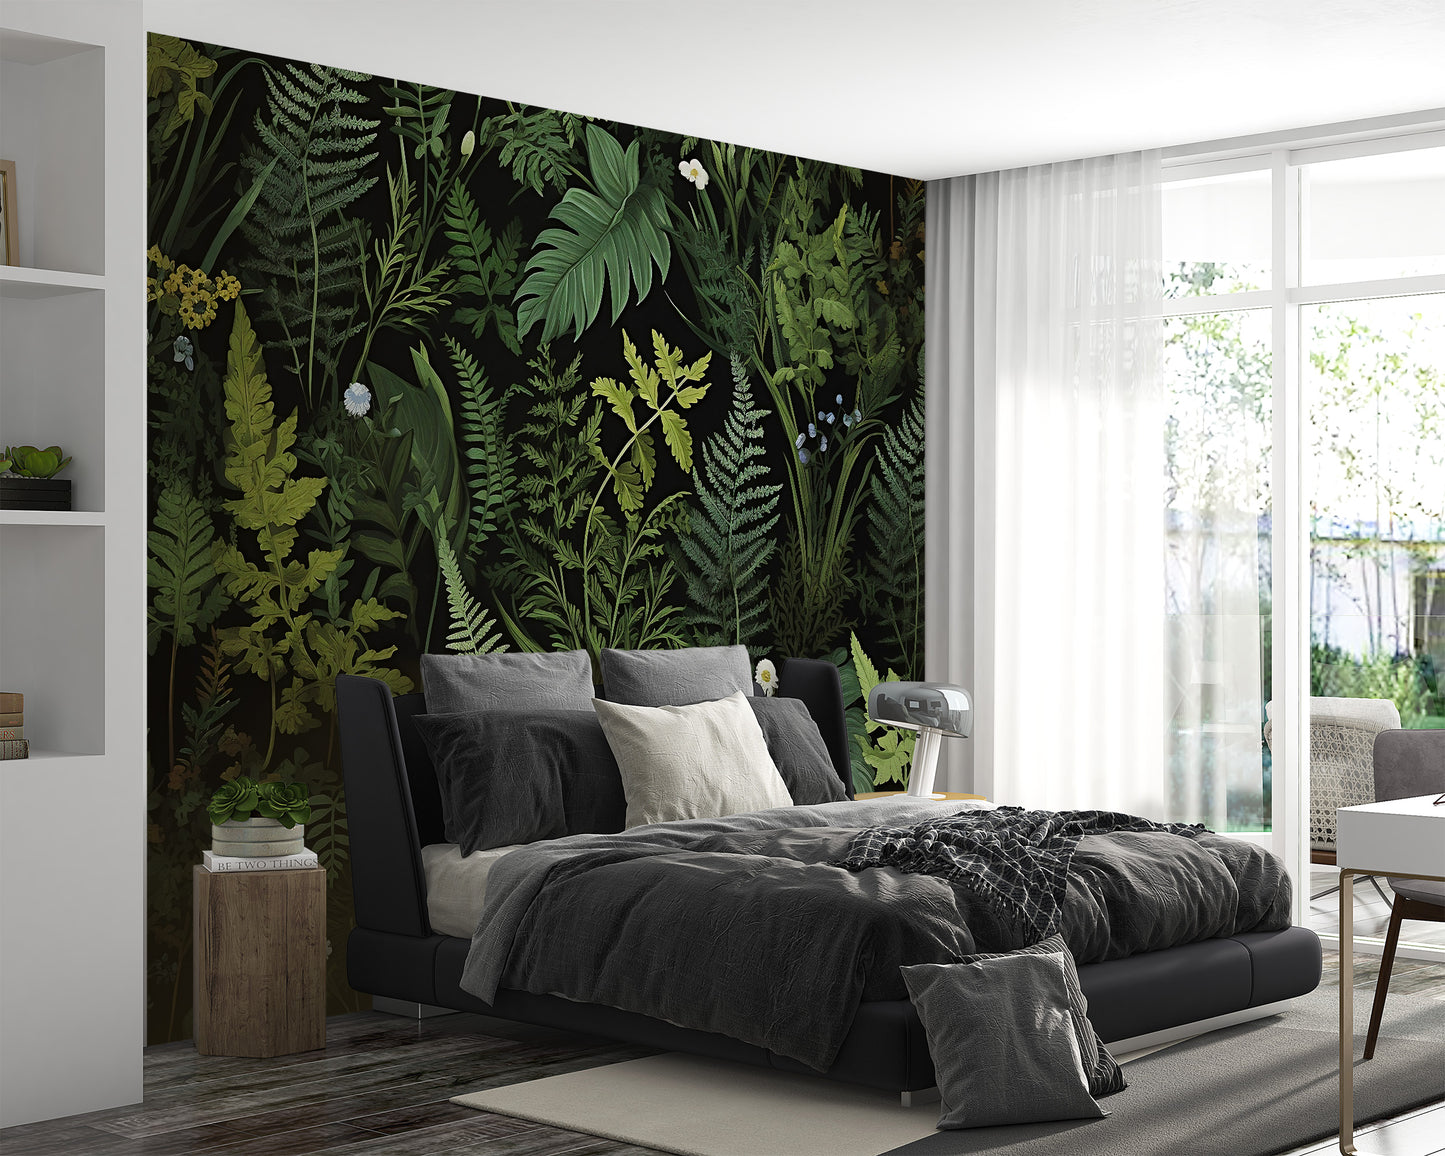 Dark Floral Peel and Stick Wall Art - Living Room Decoration